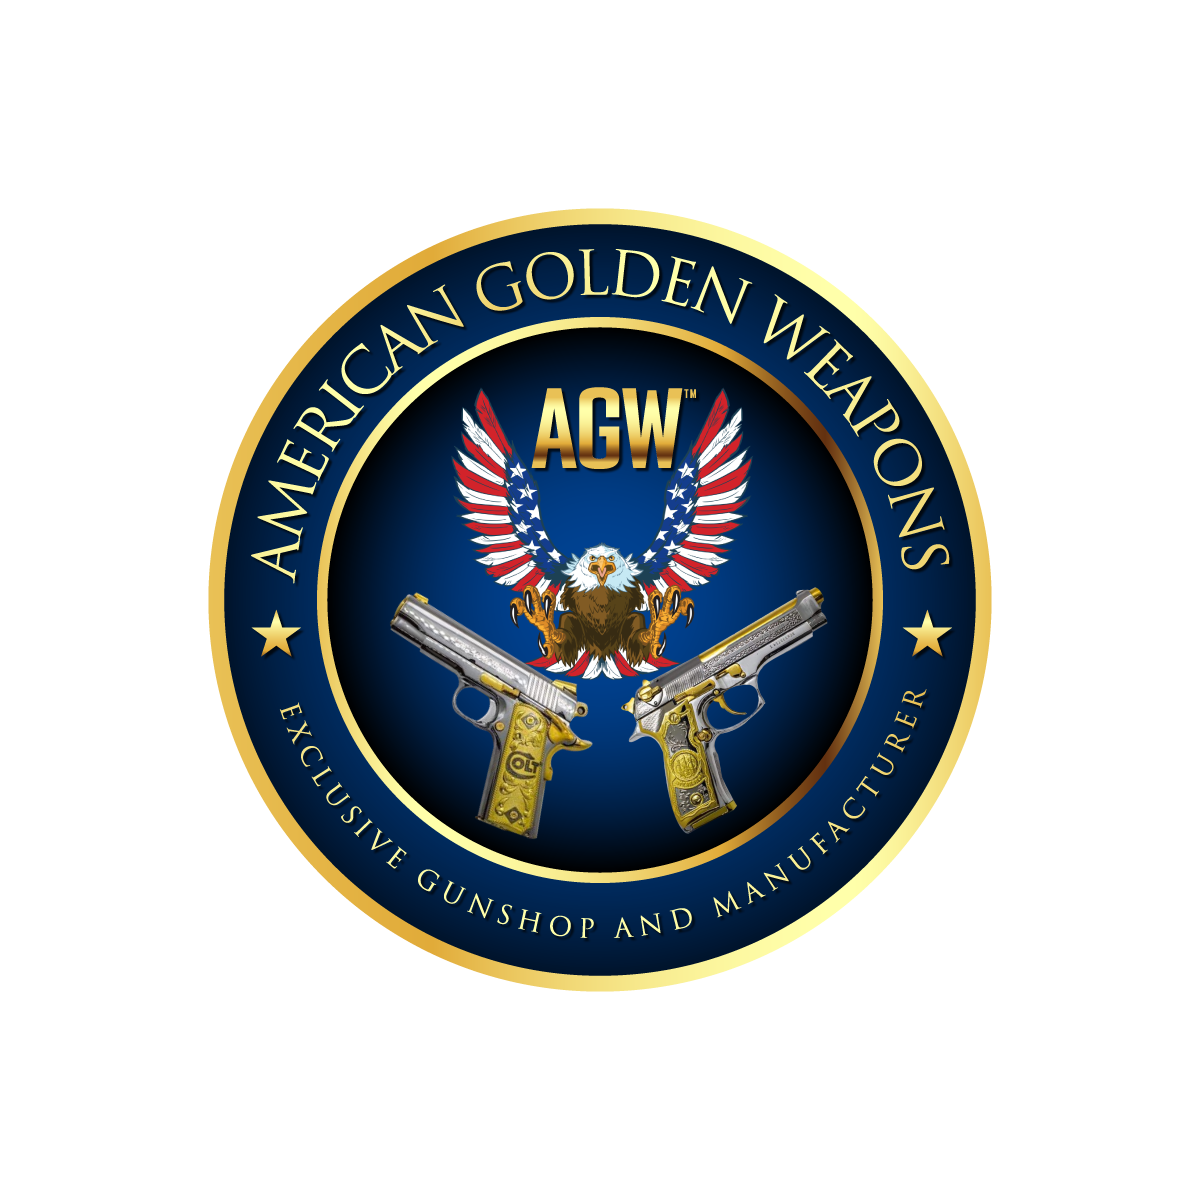 American Golden Weapons | Gun Shop And Manufacturer In The USA